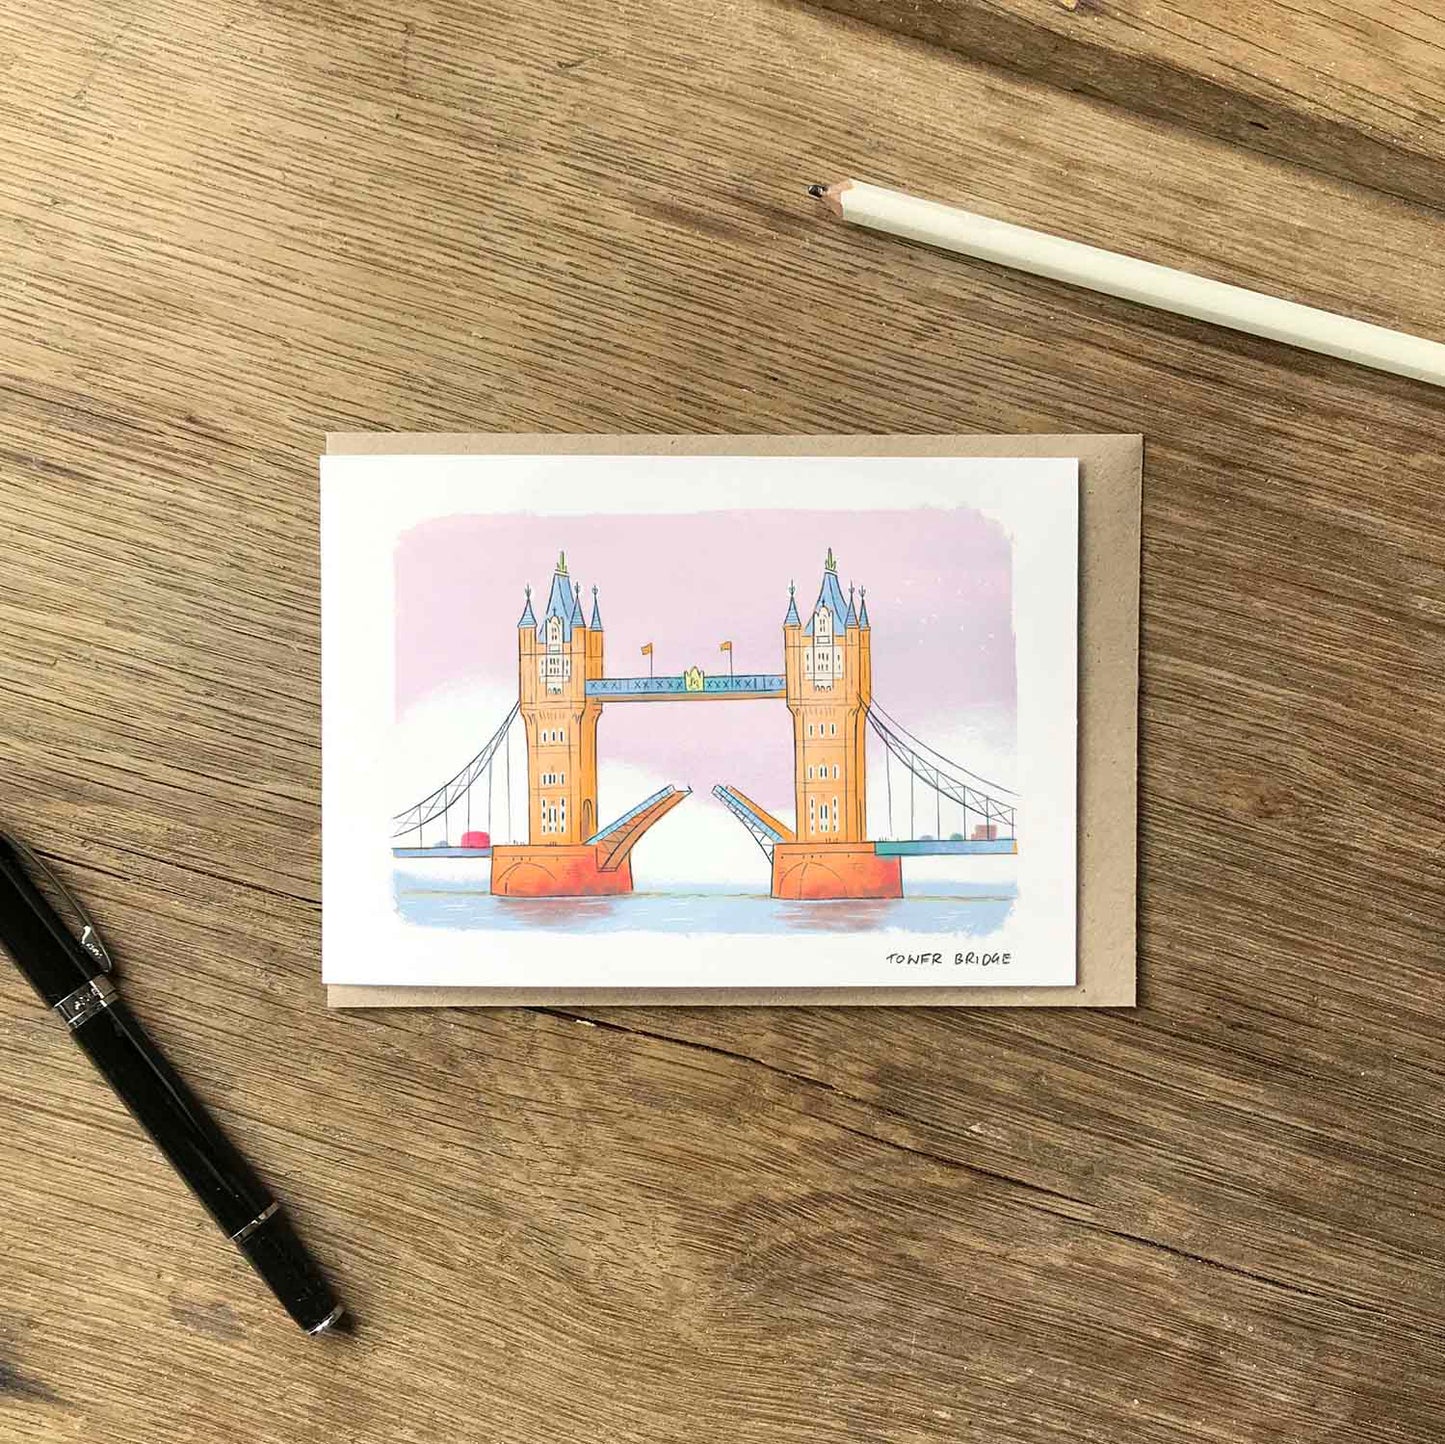 London's Tower Bridge beautifully illustrated on a greeting card from mike green illustration.